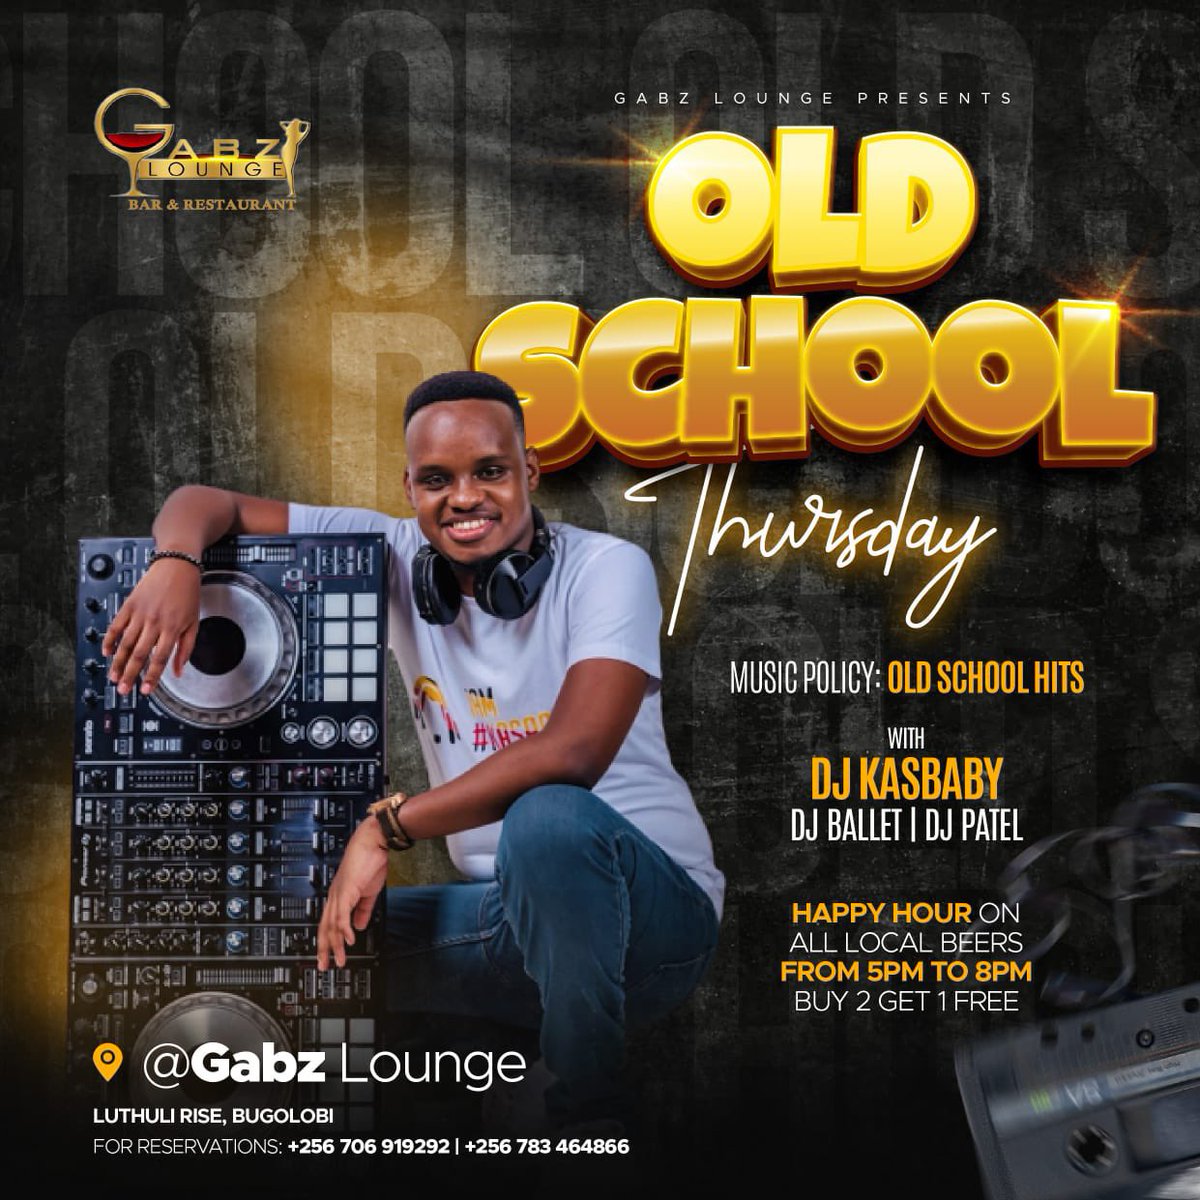 Old Skool is the best Skool and that’s the plan today at @gabzlounge 
Fall in tonight for #OldSchoolThursday with @djKasBaby  🎶 💃🕺
Happy Hour on all local beers 🍻🥂 from 5pm - 8pm 
Buy 2 & Get 1 free.